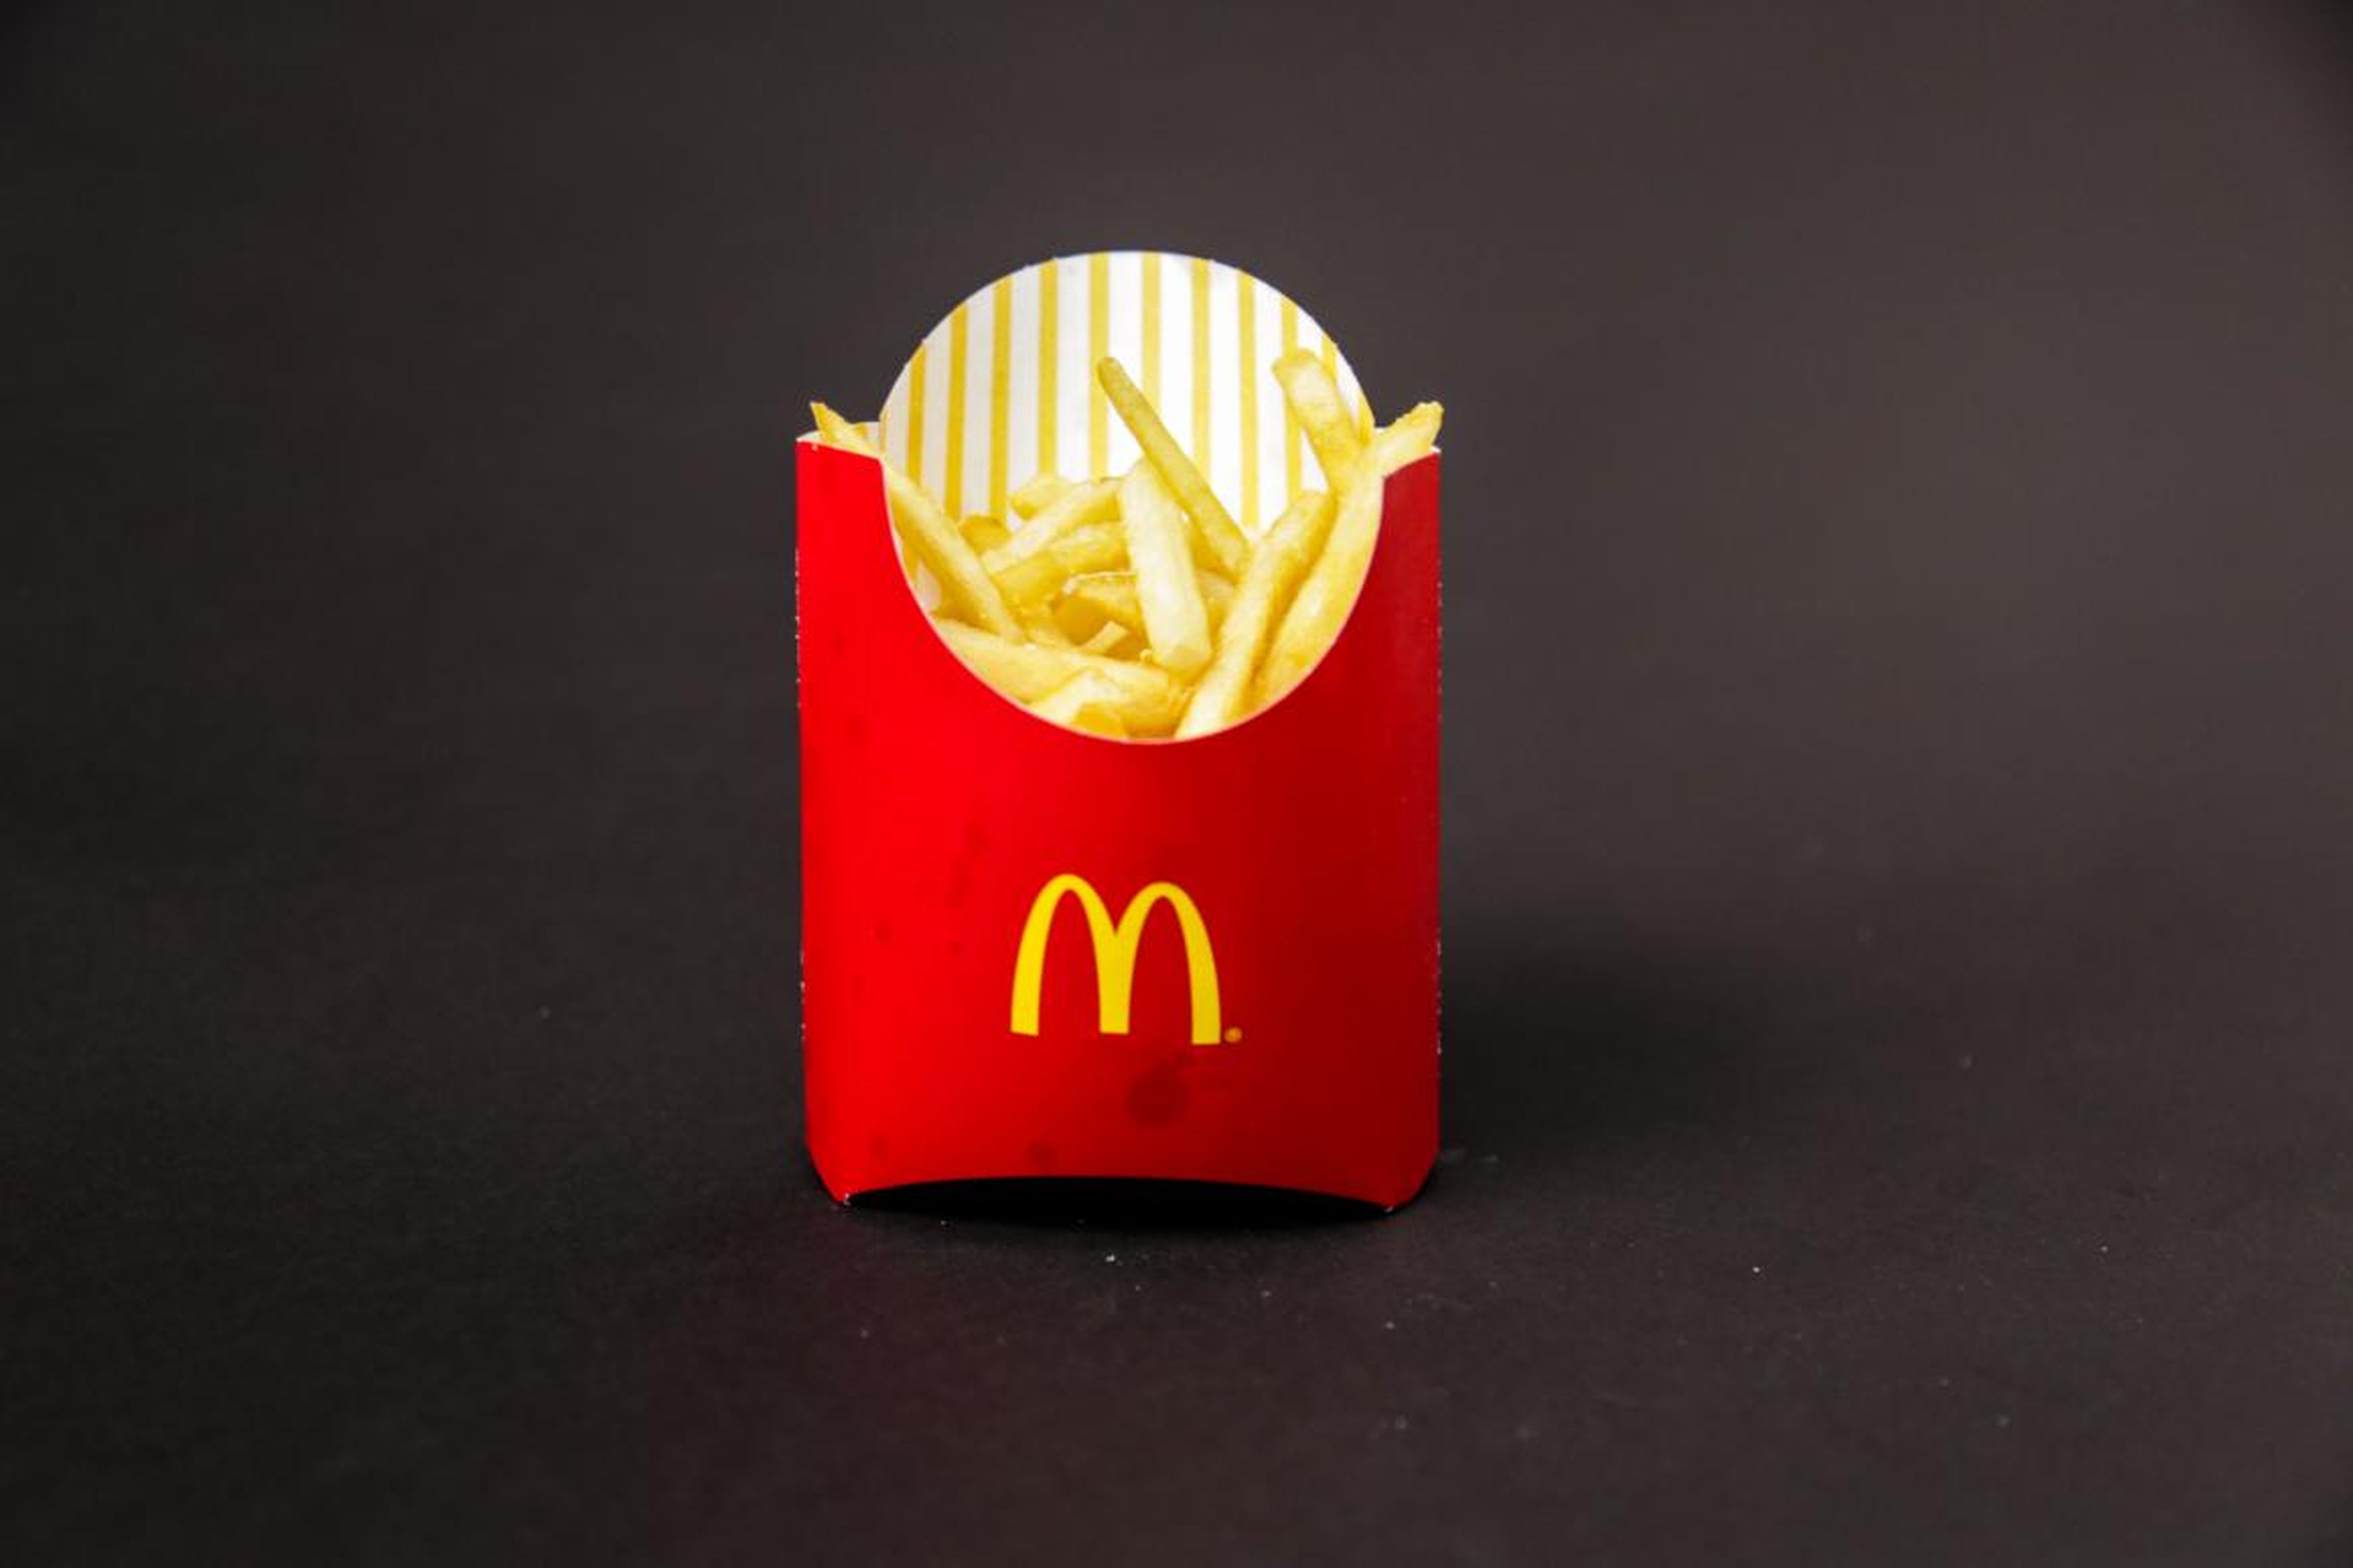 McDonald's fries have always ruled over their own kingdom, at least in spirit.